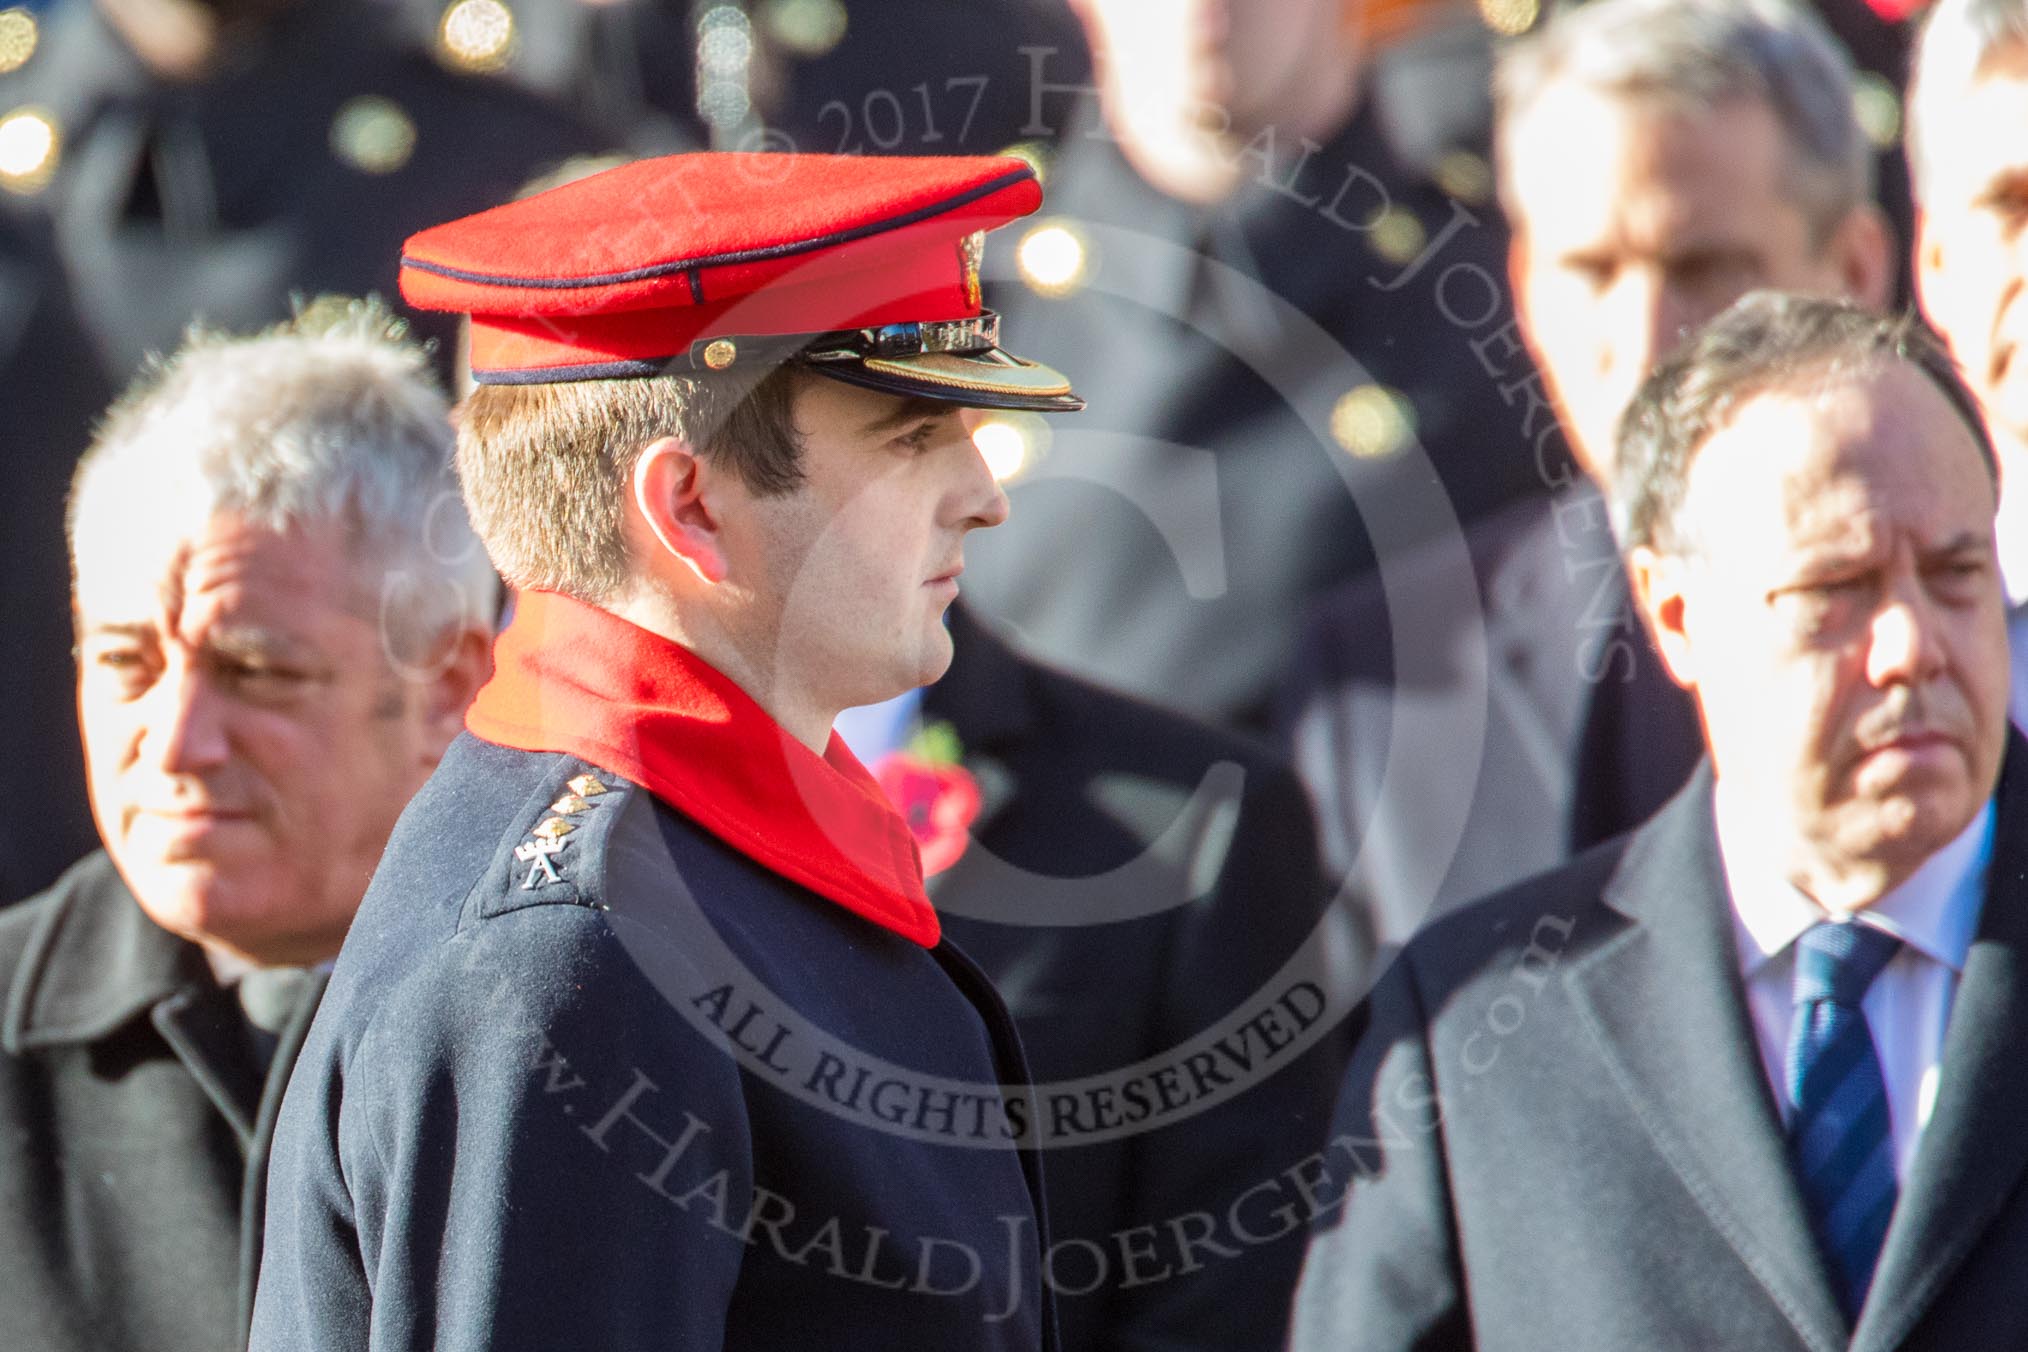 Captain Edward Monkton, Royal Lancers, Equerry to The Duke of York, during Remembrance Sunday Cenotaph Ceremony 2018 at Horse Guards Parade, Westminster, London, 11 November 2018, 10:59.